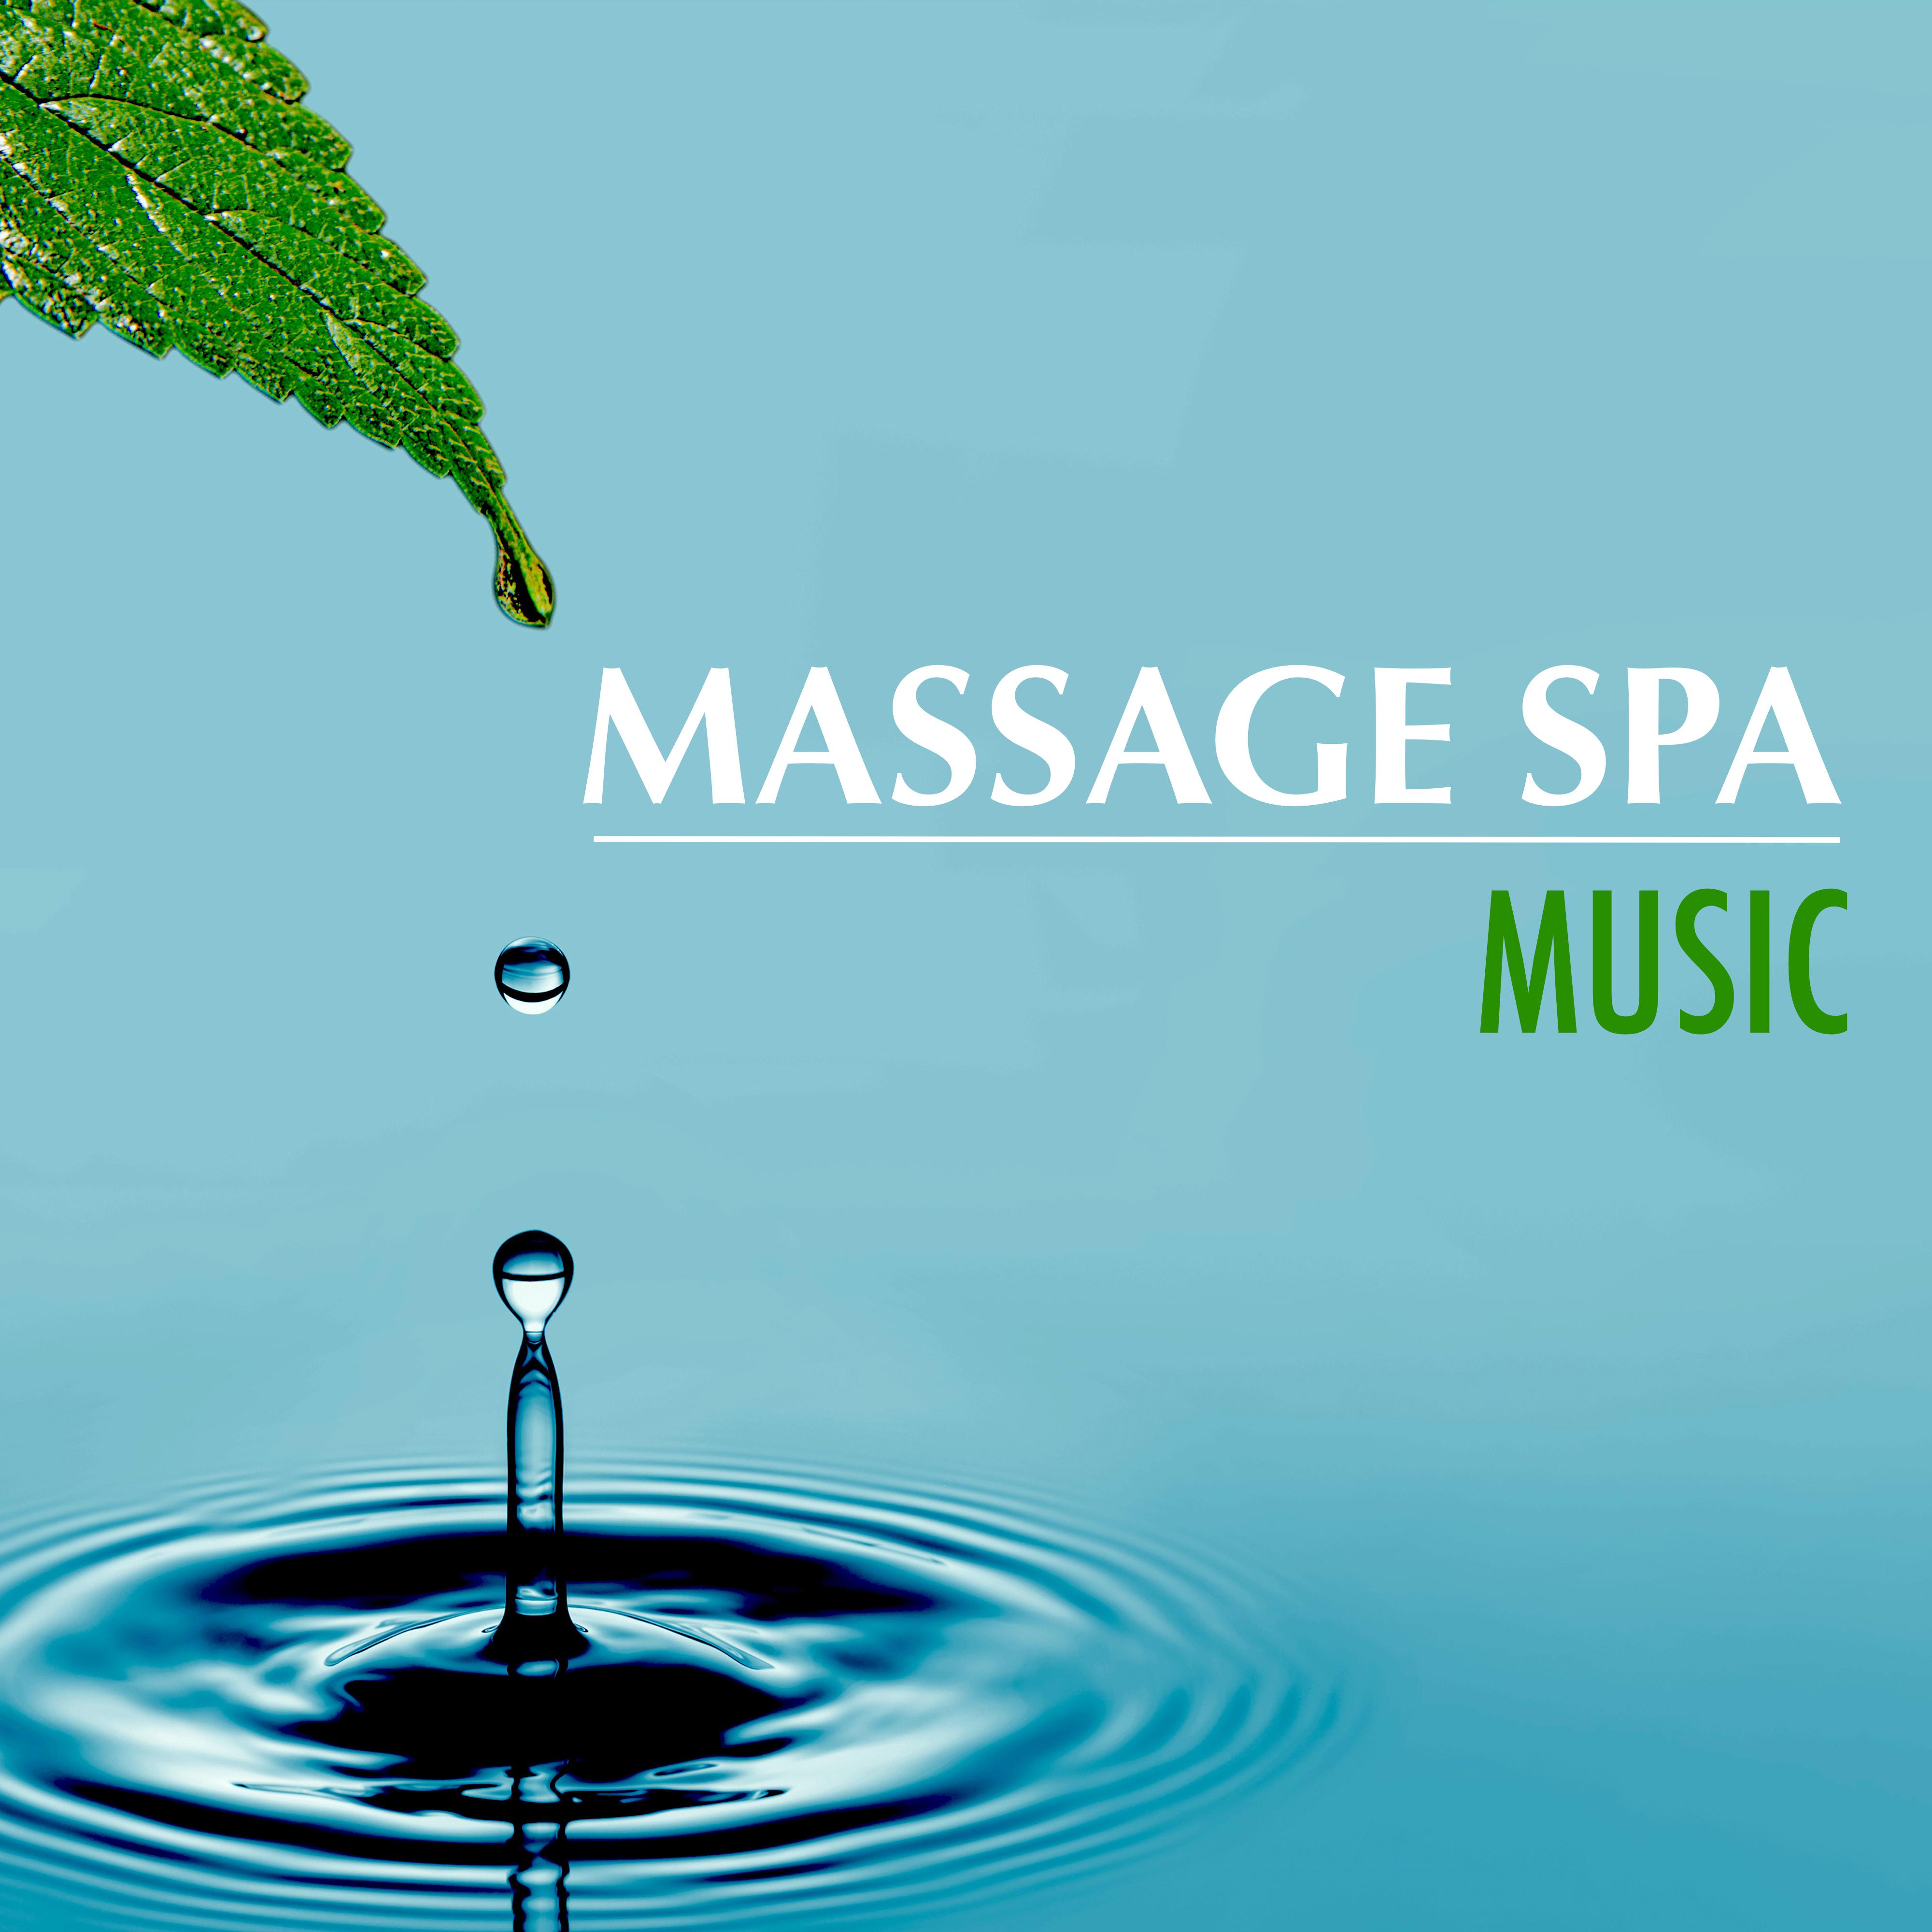 Massage Spa Music: Music for Deeply Relaxing Massage & Healing Music for Lymphatic Drainage Therapy